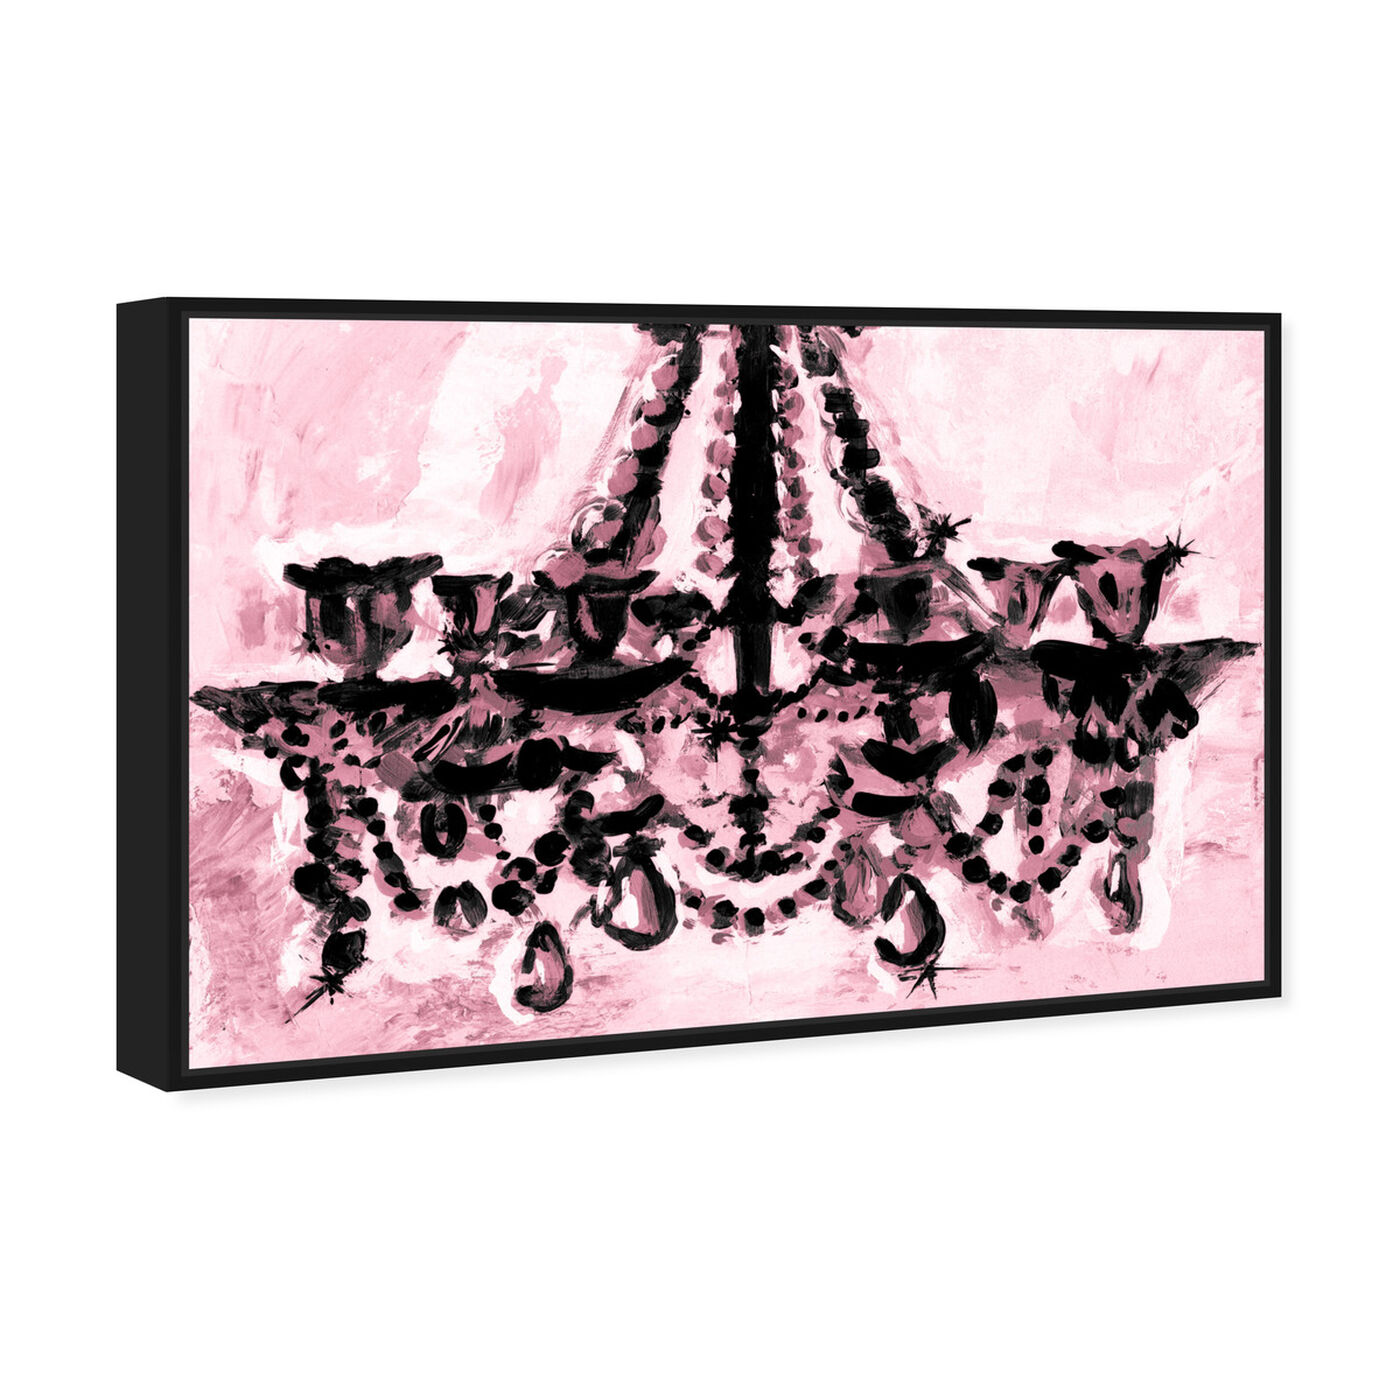 Angled view of Rosa y Negro featuring fashion and glam and chandeliers art.